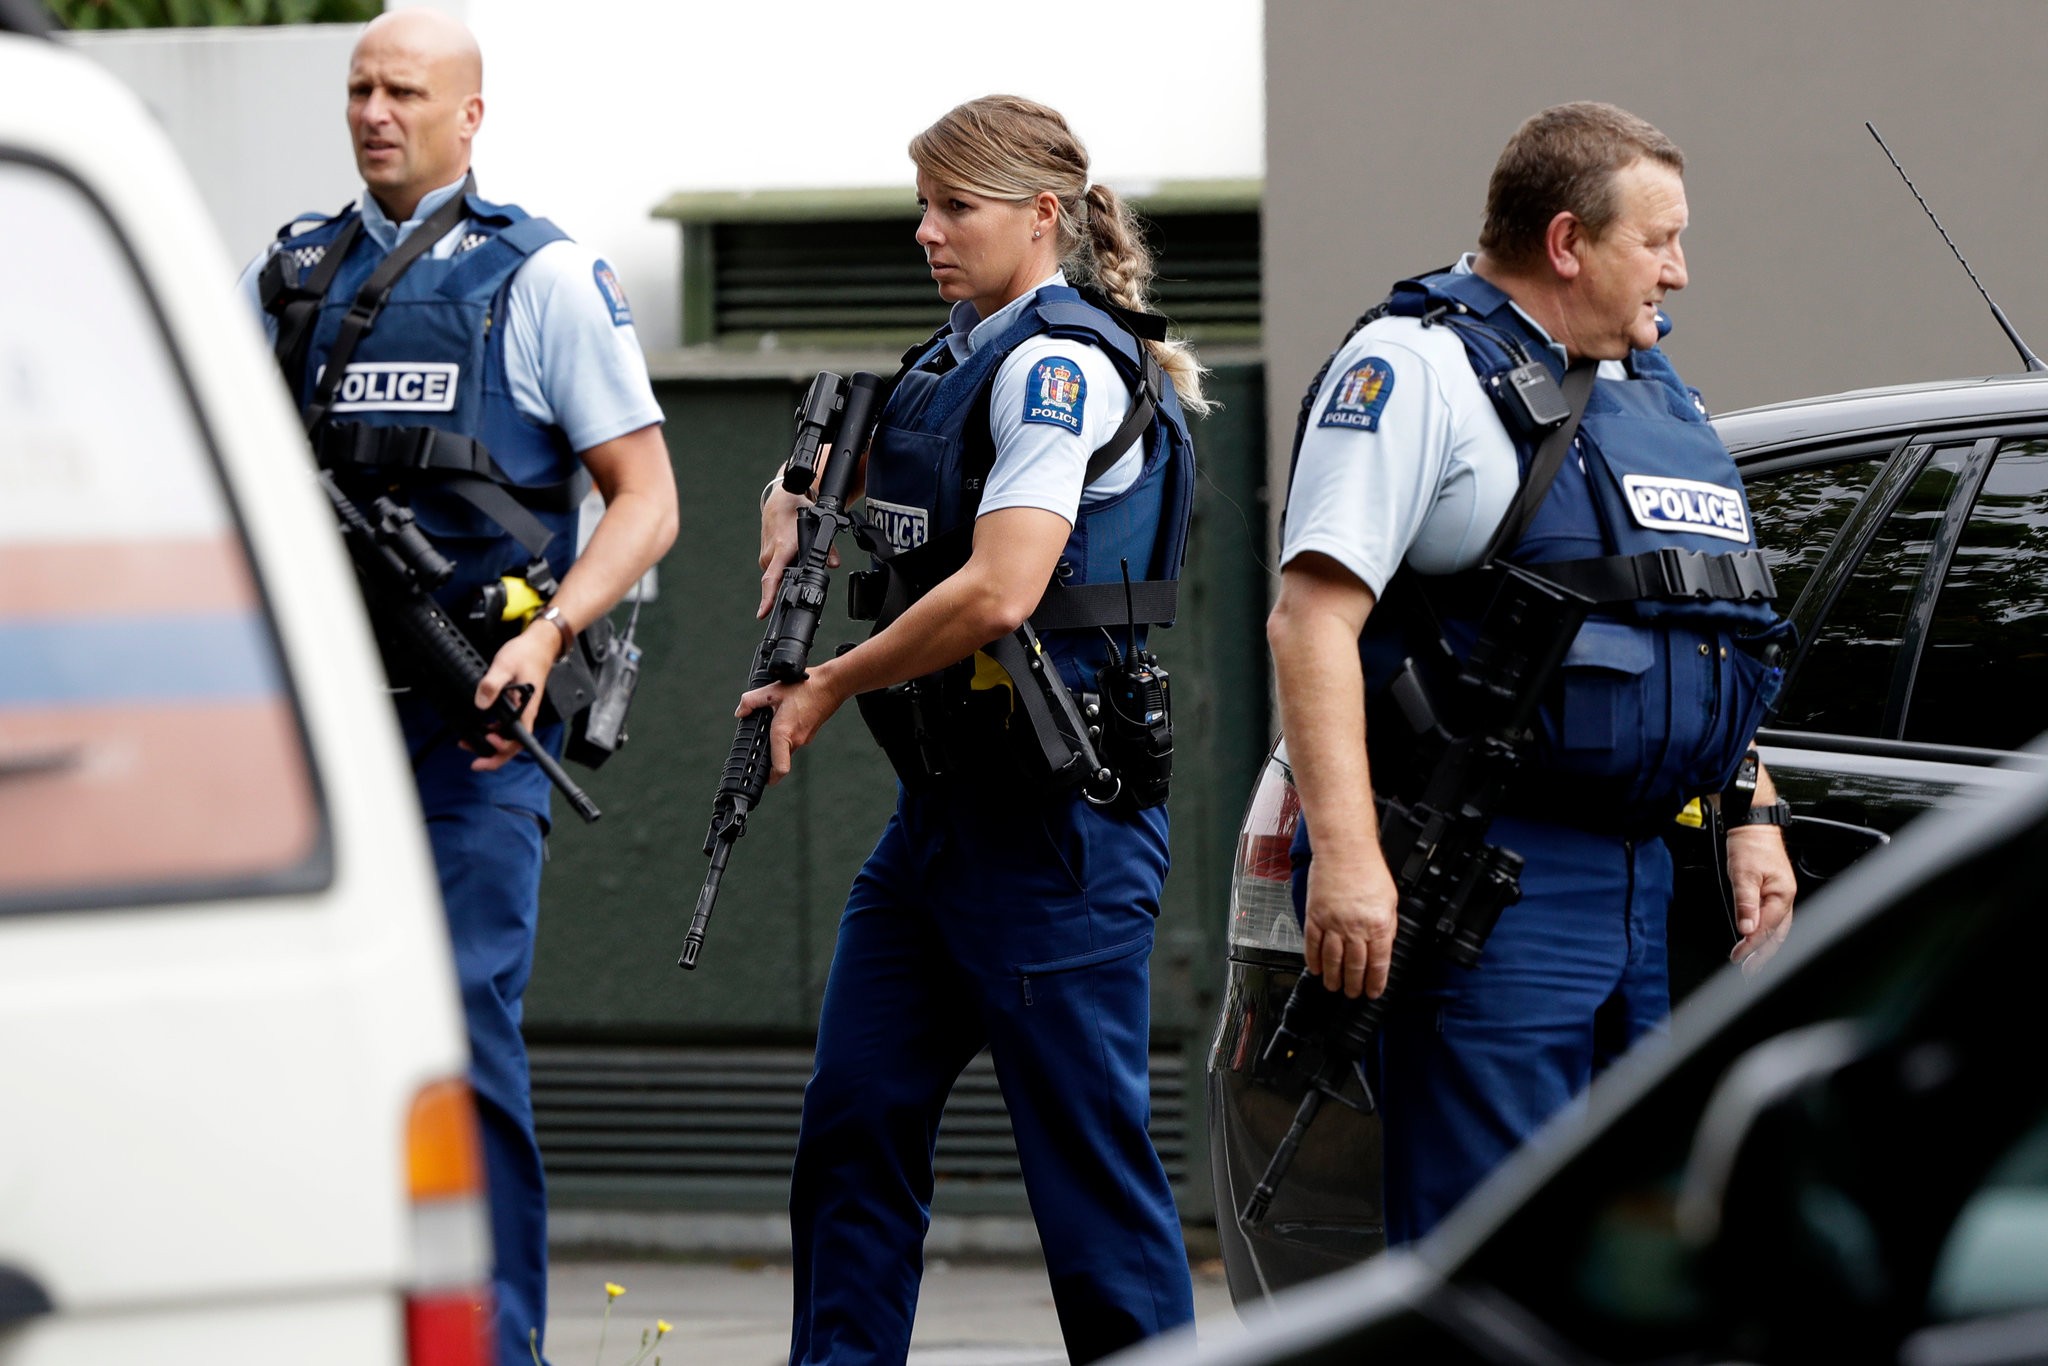 Christchurch Terrorist Shooting Live Updates | 49 Dead 2 Mosques Attacked